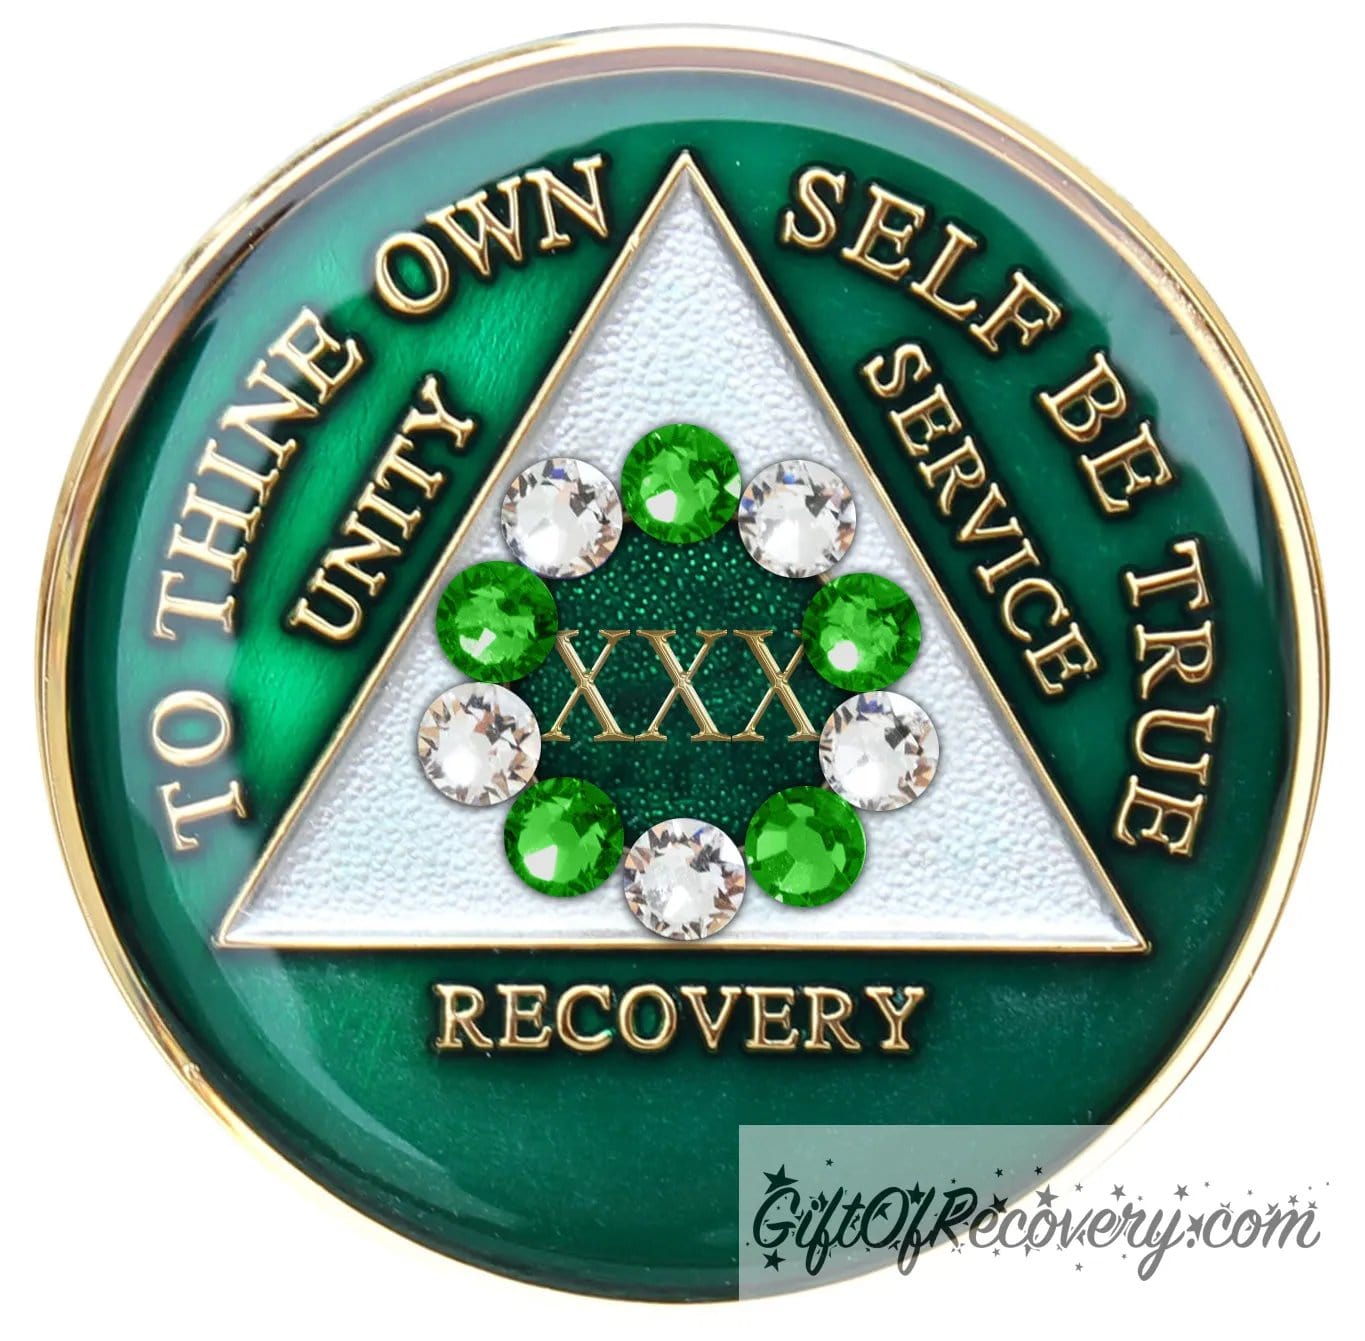 30 year emerald green AA medallion with the 10th step in emphasis in the center, 5 emerald green genuine crystals and 5 clear genuine crystals, inside the triangle is pearl white, while the circle is sparkle green. To thine own self be true, unity, service, recovery, and the roman numeral 1, are 14k gold and sealed with resin for a glossy finish.